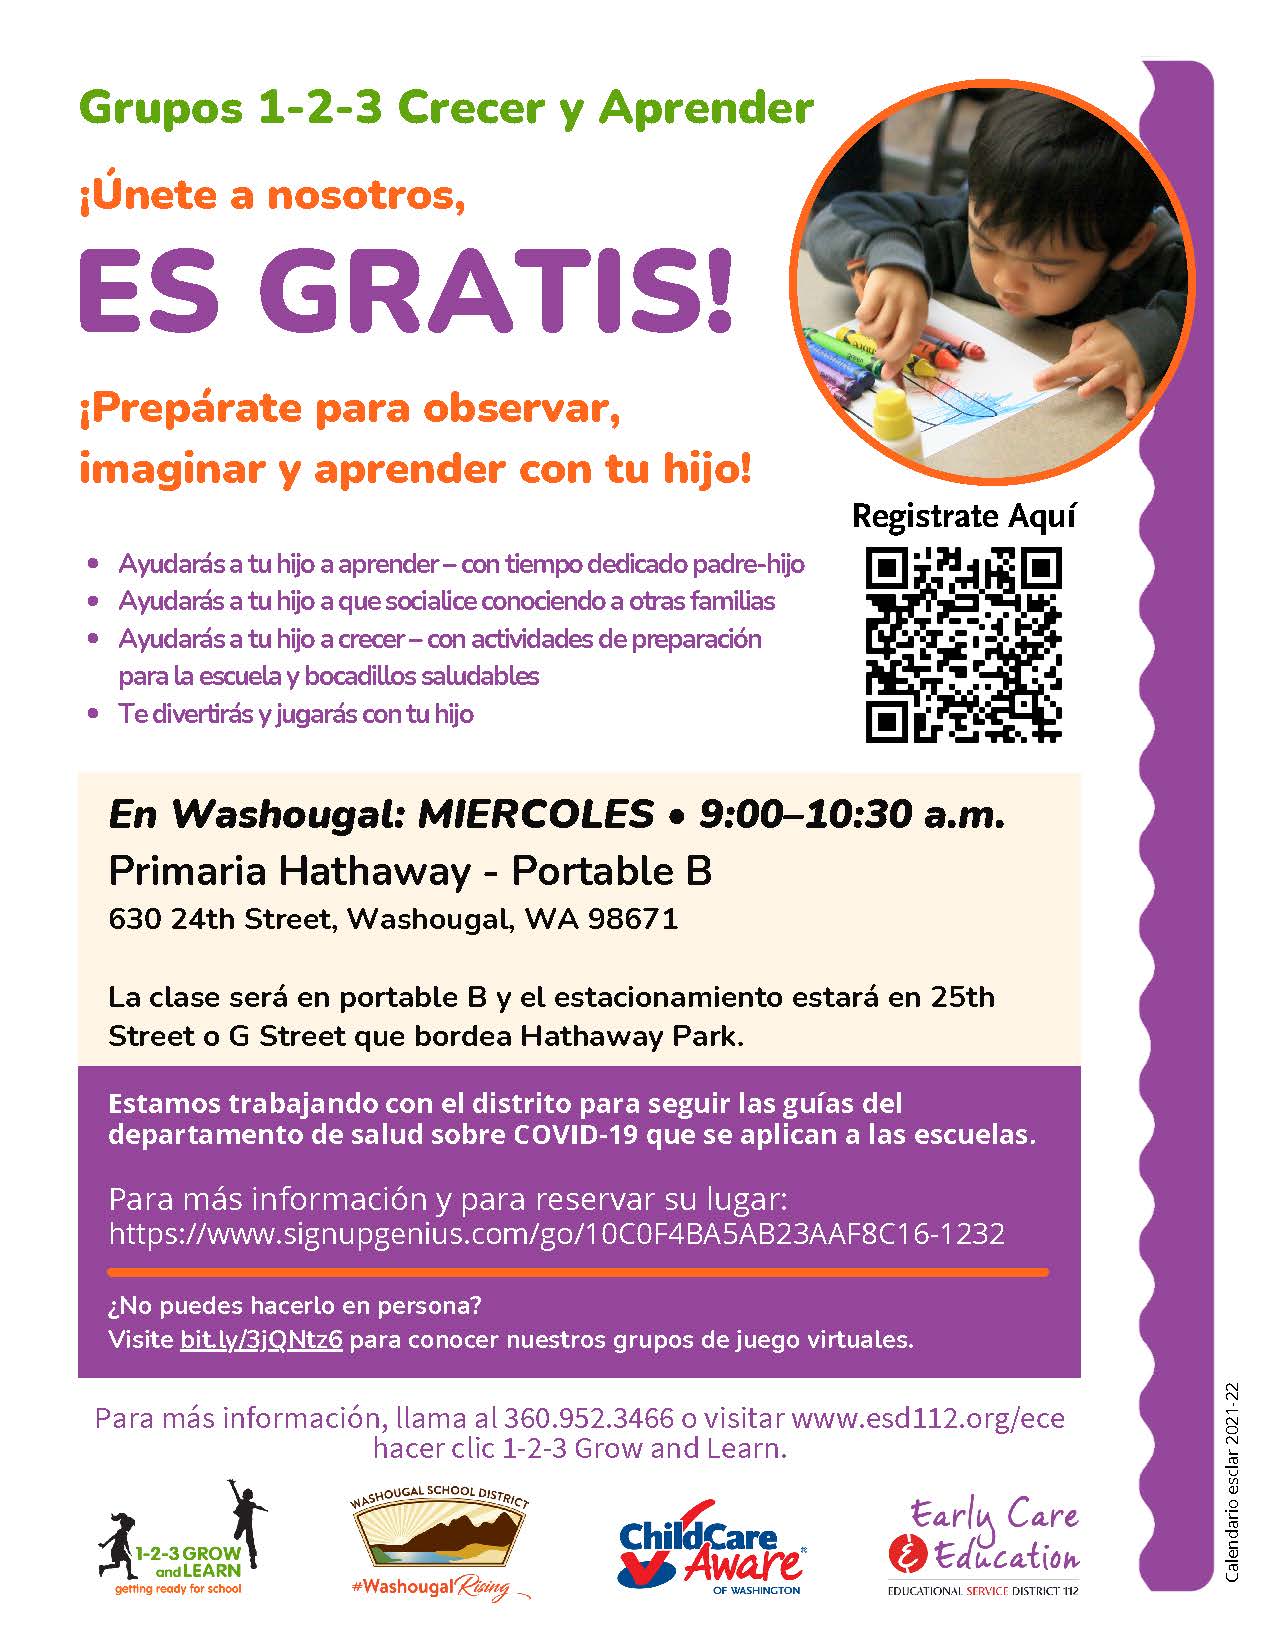 spanish 123 grow and learn ECE flier, click for accessible version